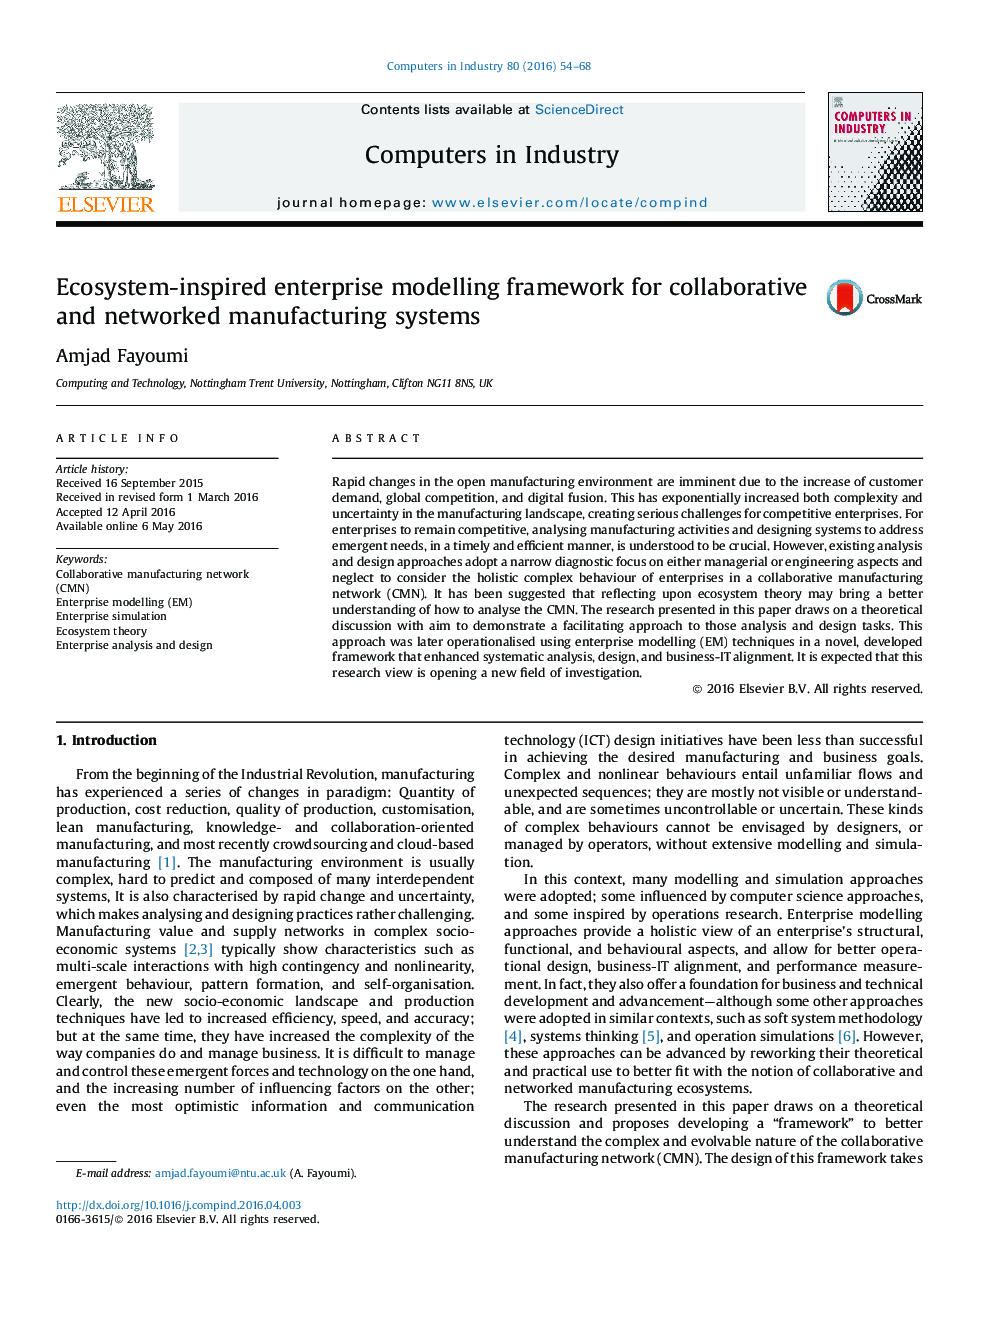 Ecosystem-inspired enterprise modelling framework for collaborative and networked manufacturing systems